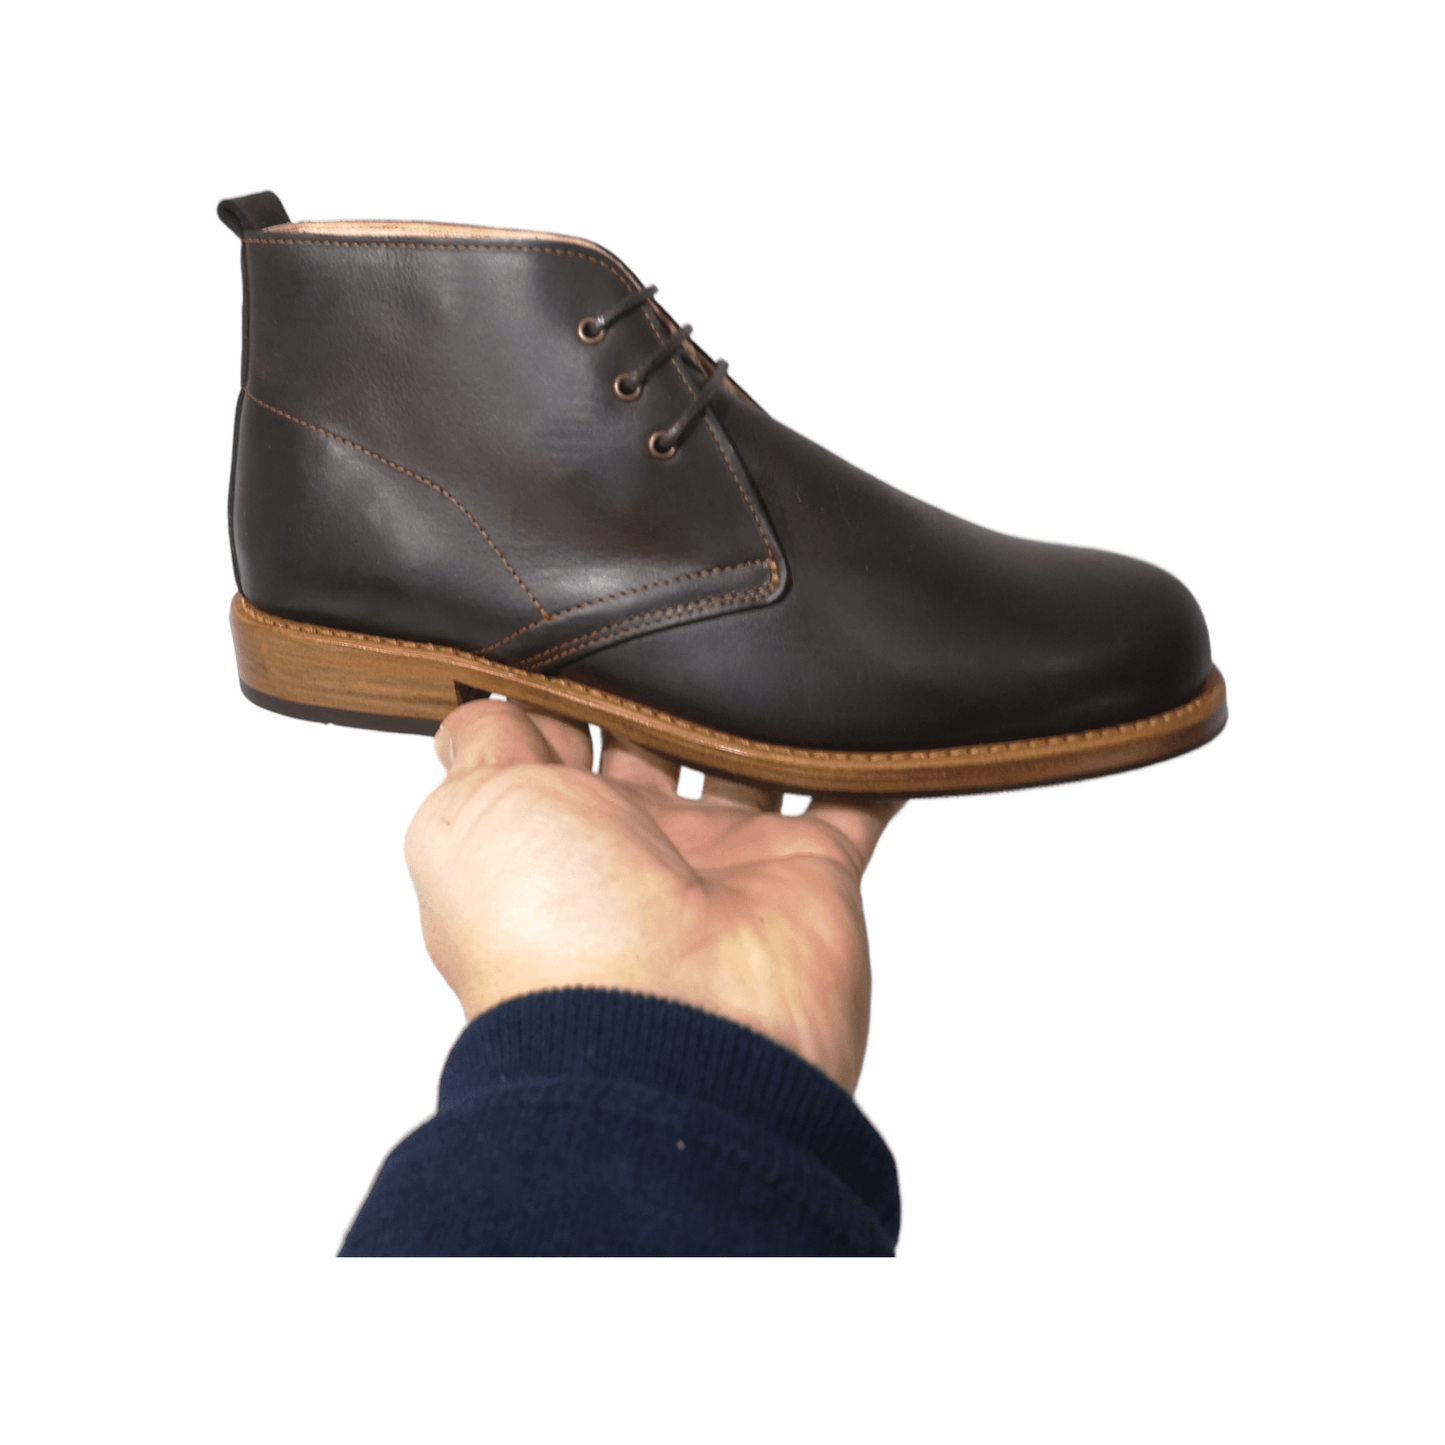 Mira Premium Boots - OldMulla - Boots Store, Handmade By George Family